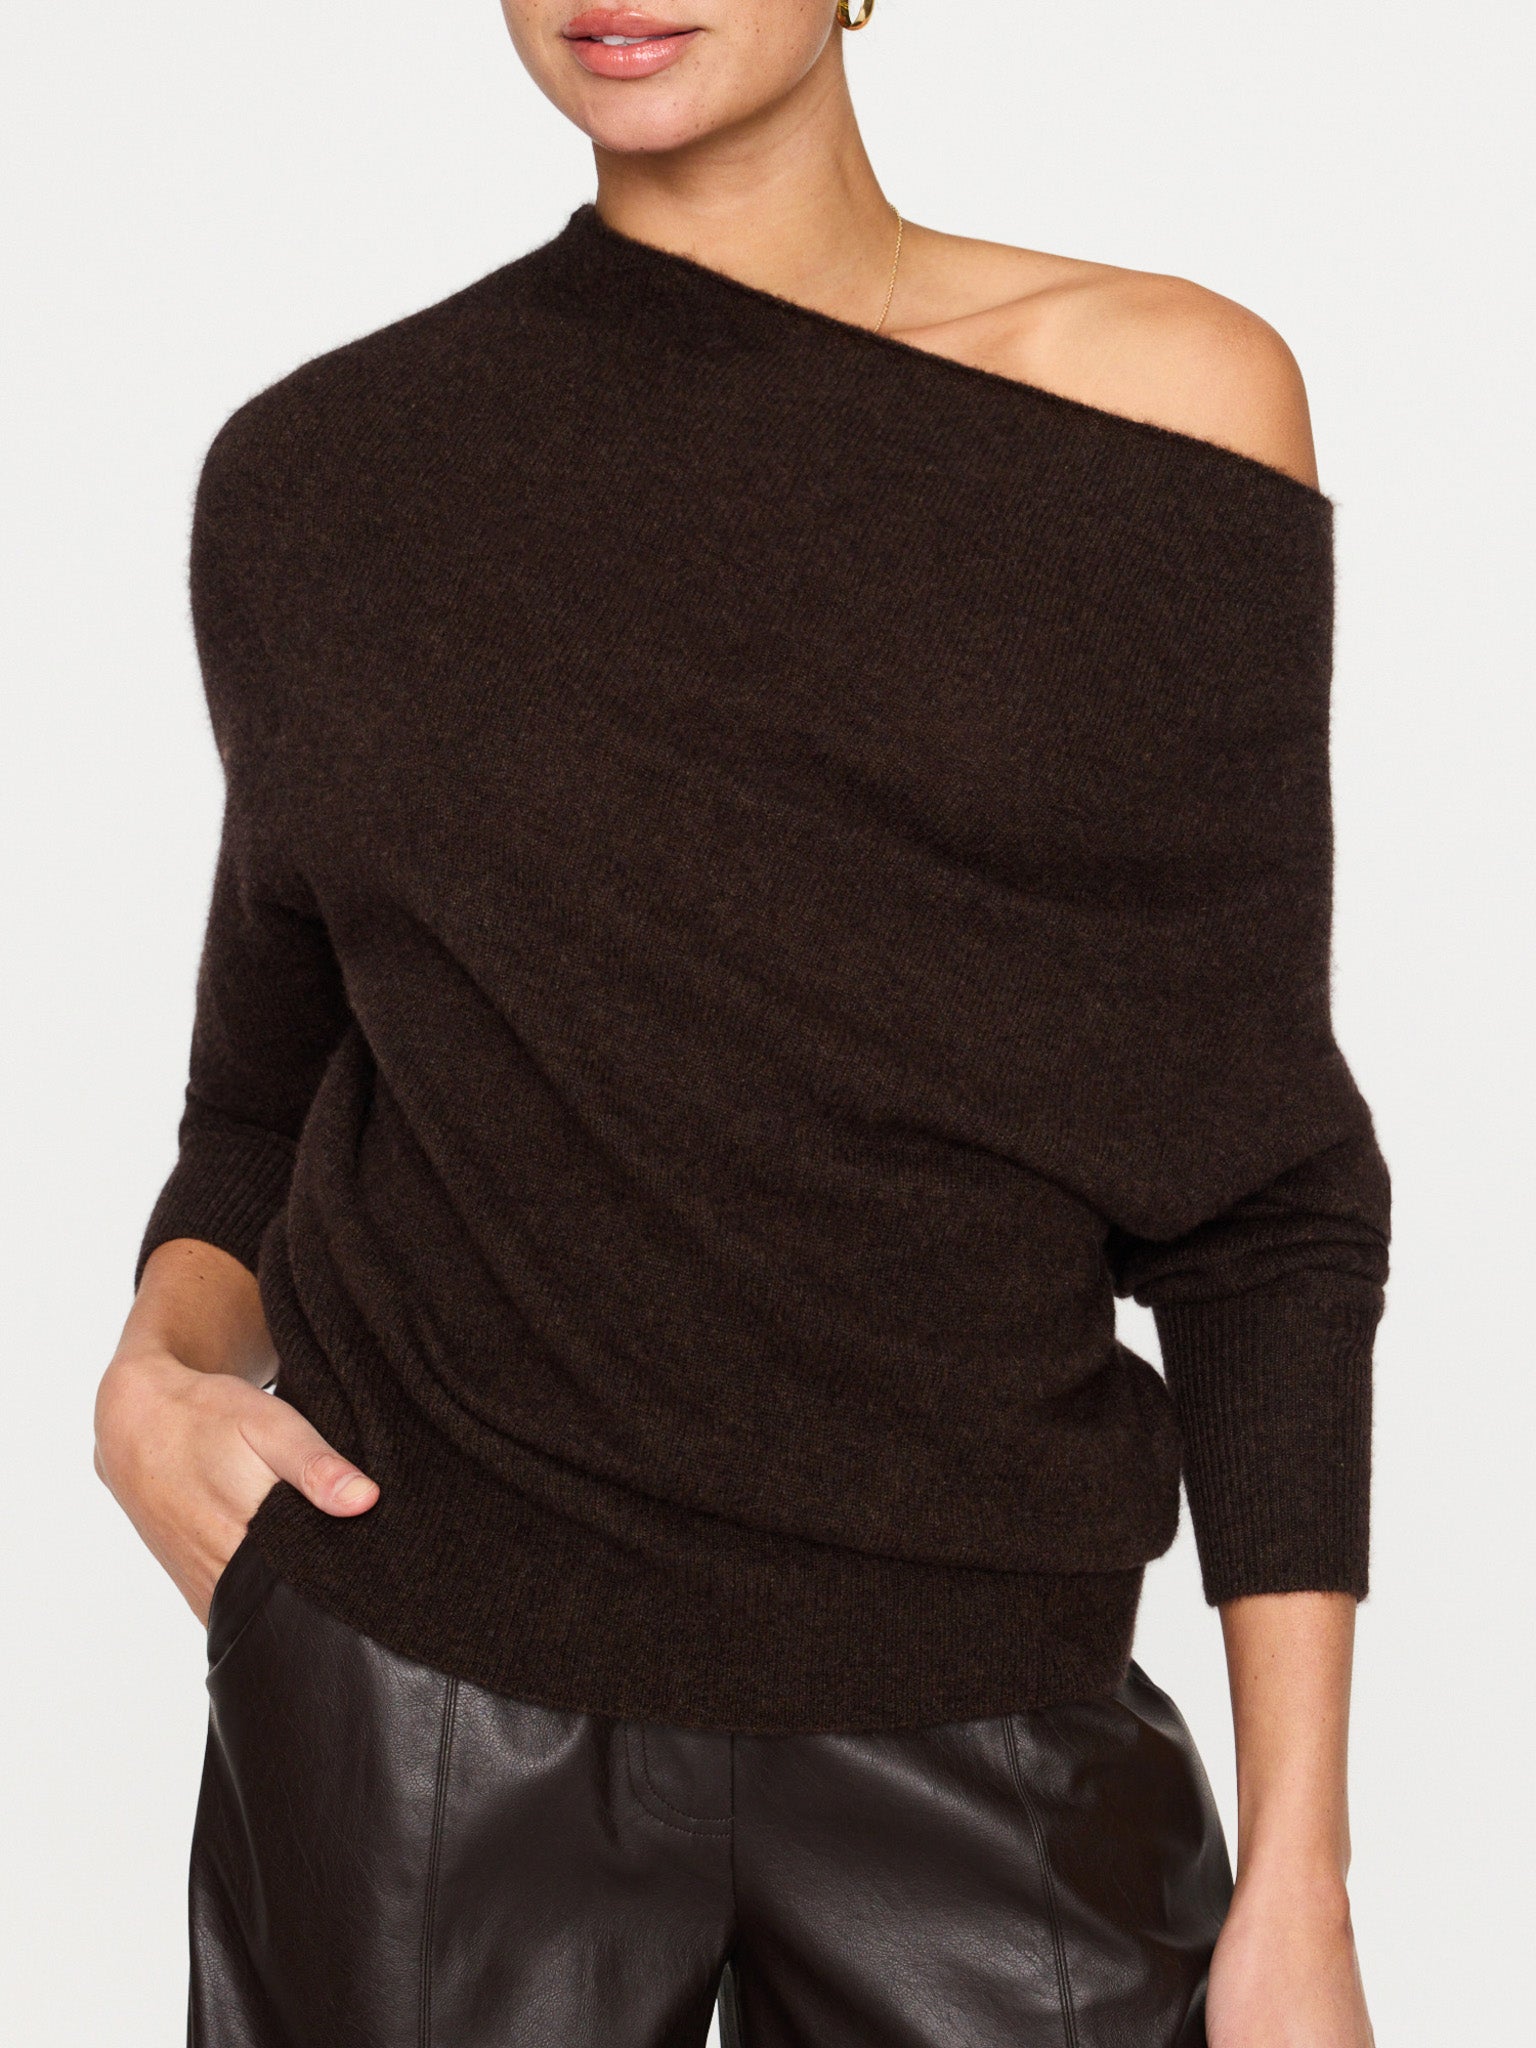 Lori cashmere off shoulder brown sweater front view 2